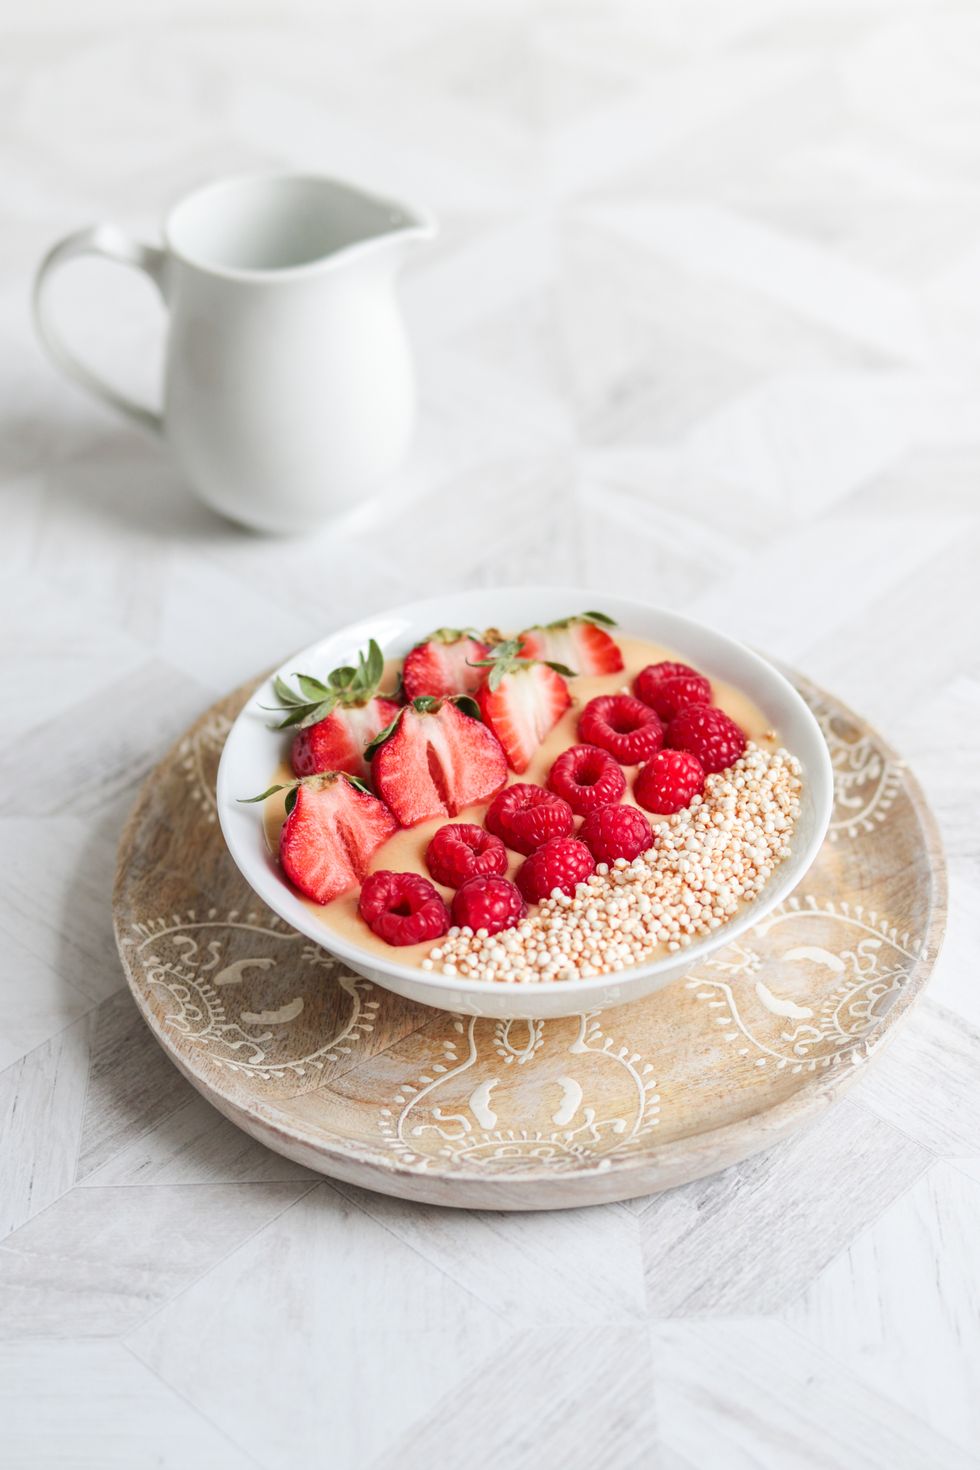 healthy vegan breakfast oats bowl with berries and puffed quinoa